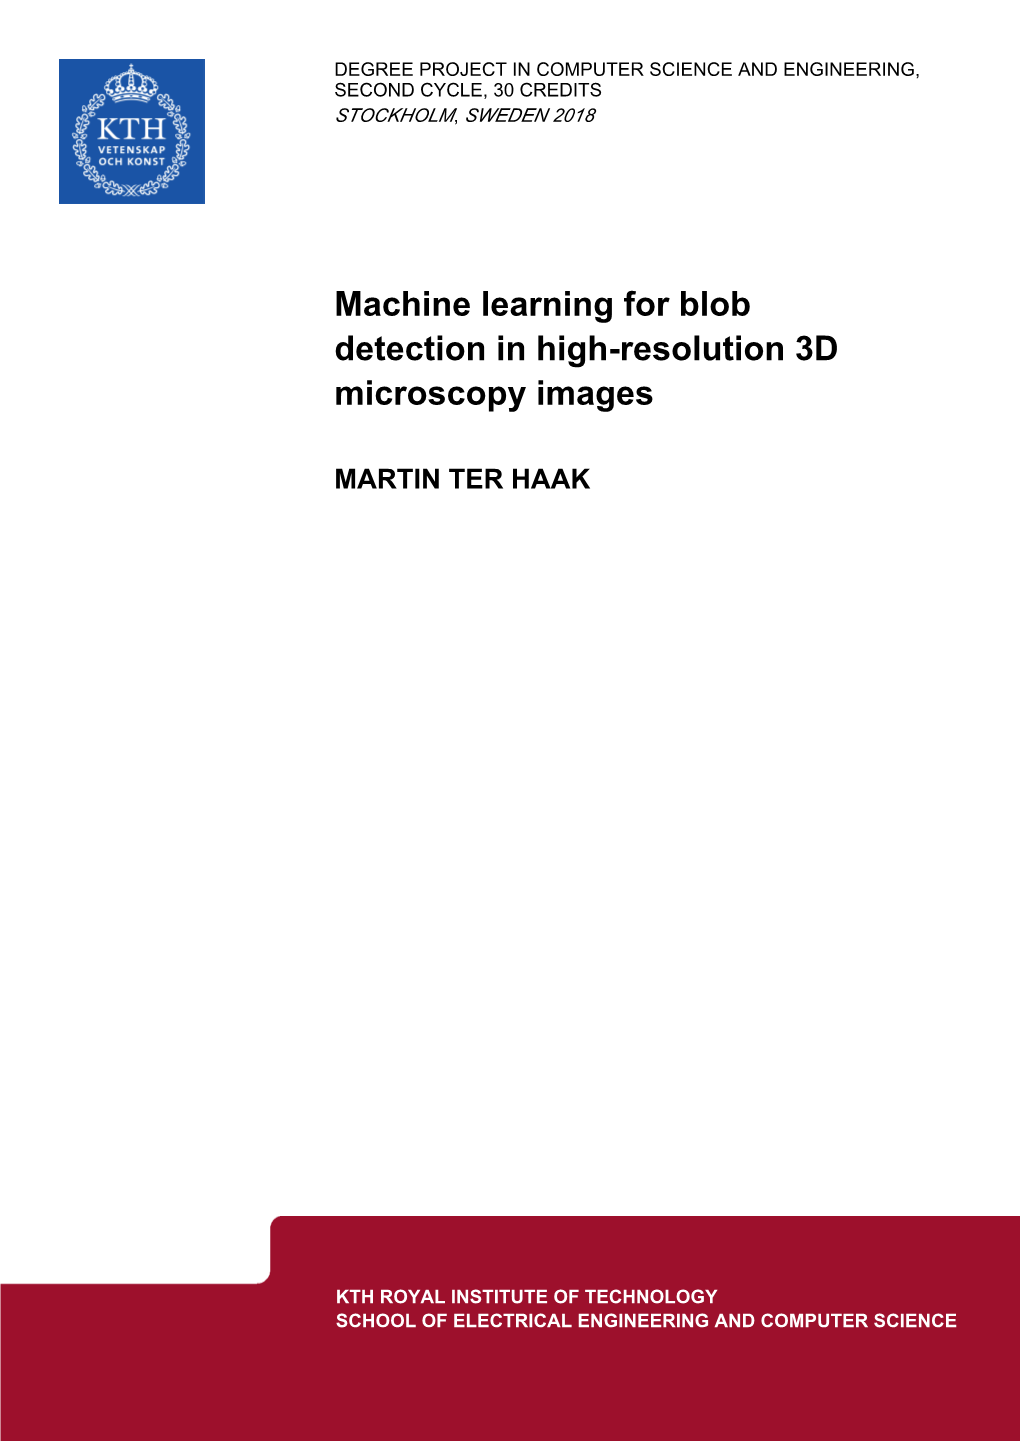 Machine Learning for Blob Detection in High-Resolution 3D Microscopy Images